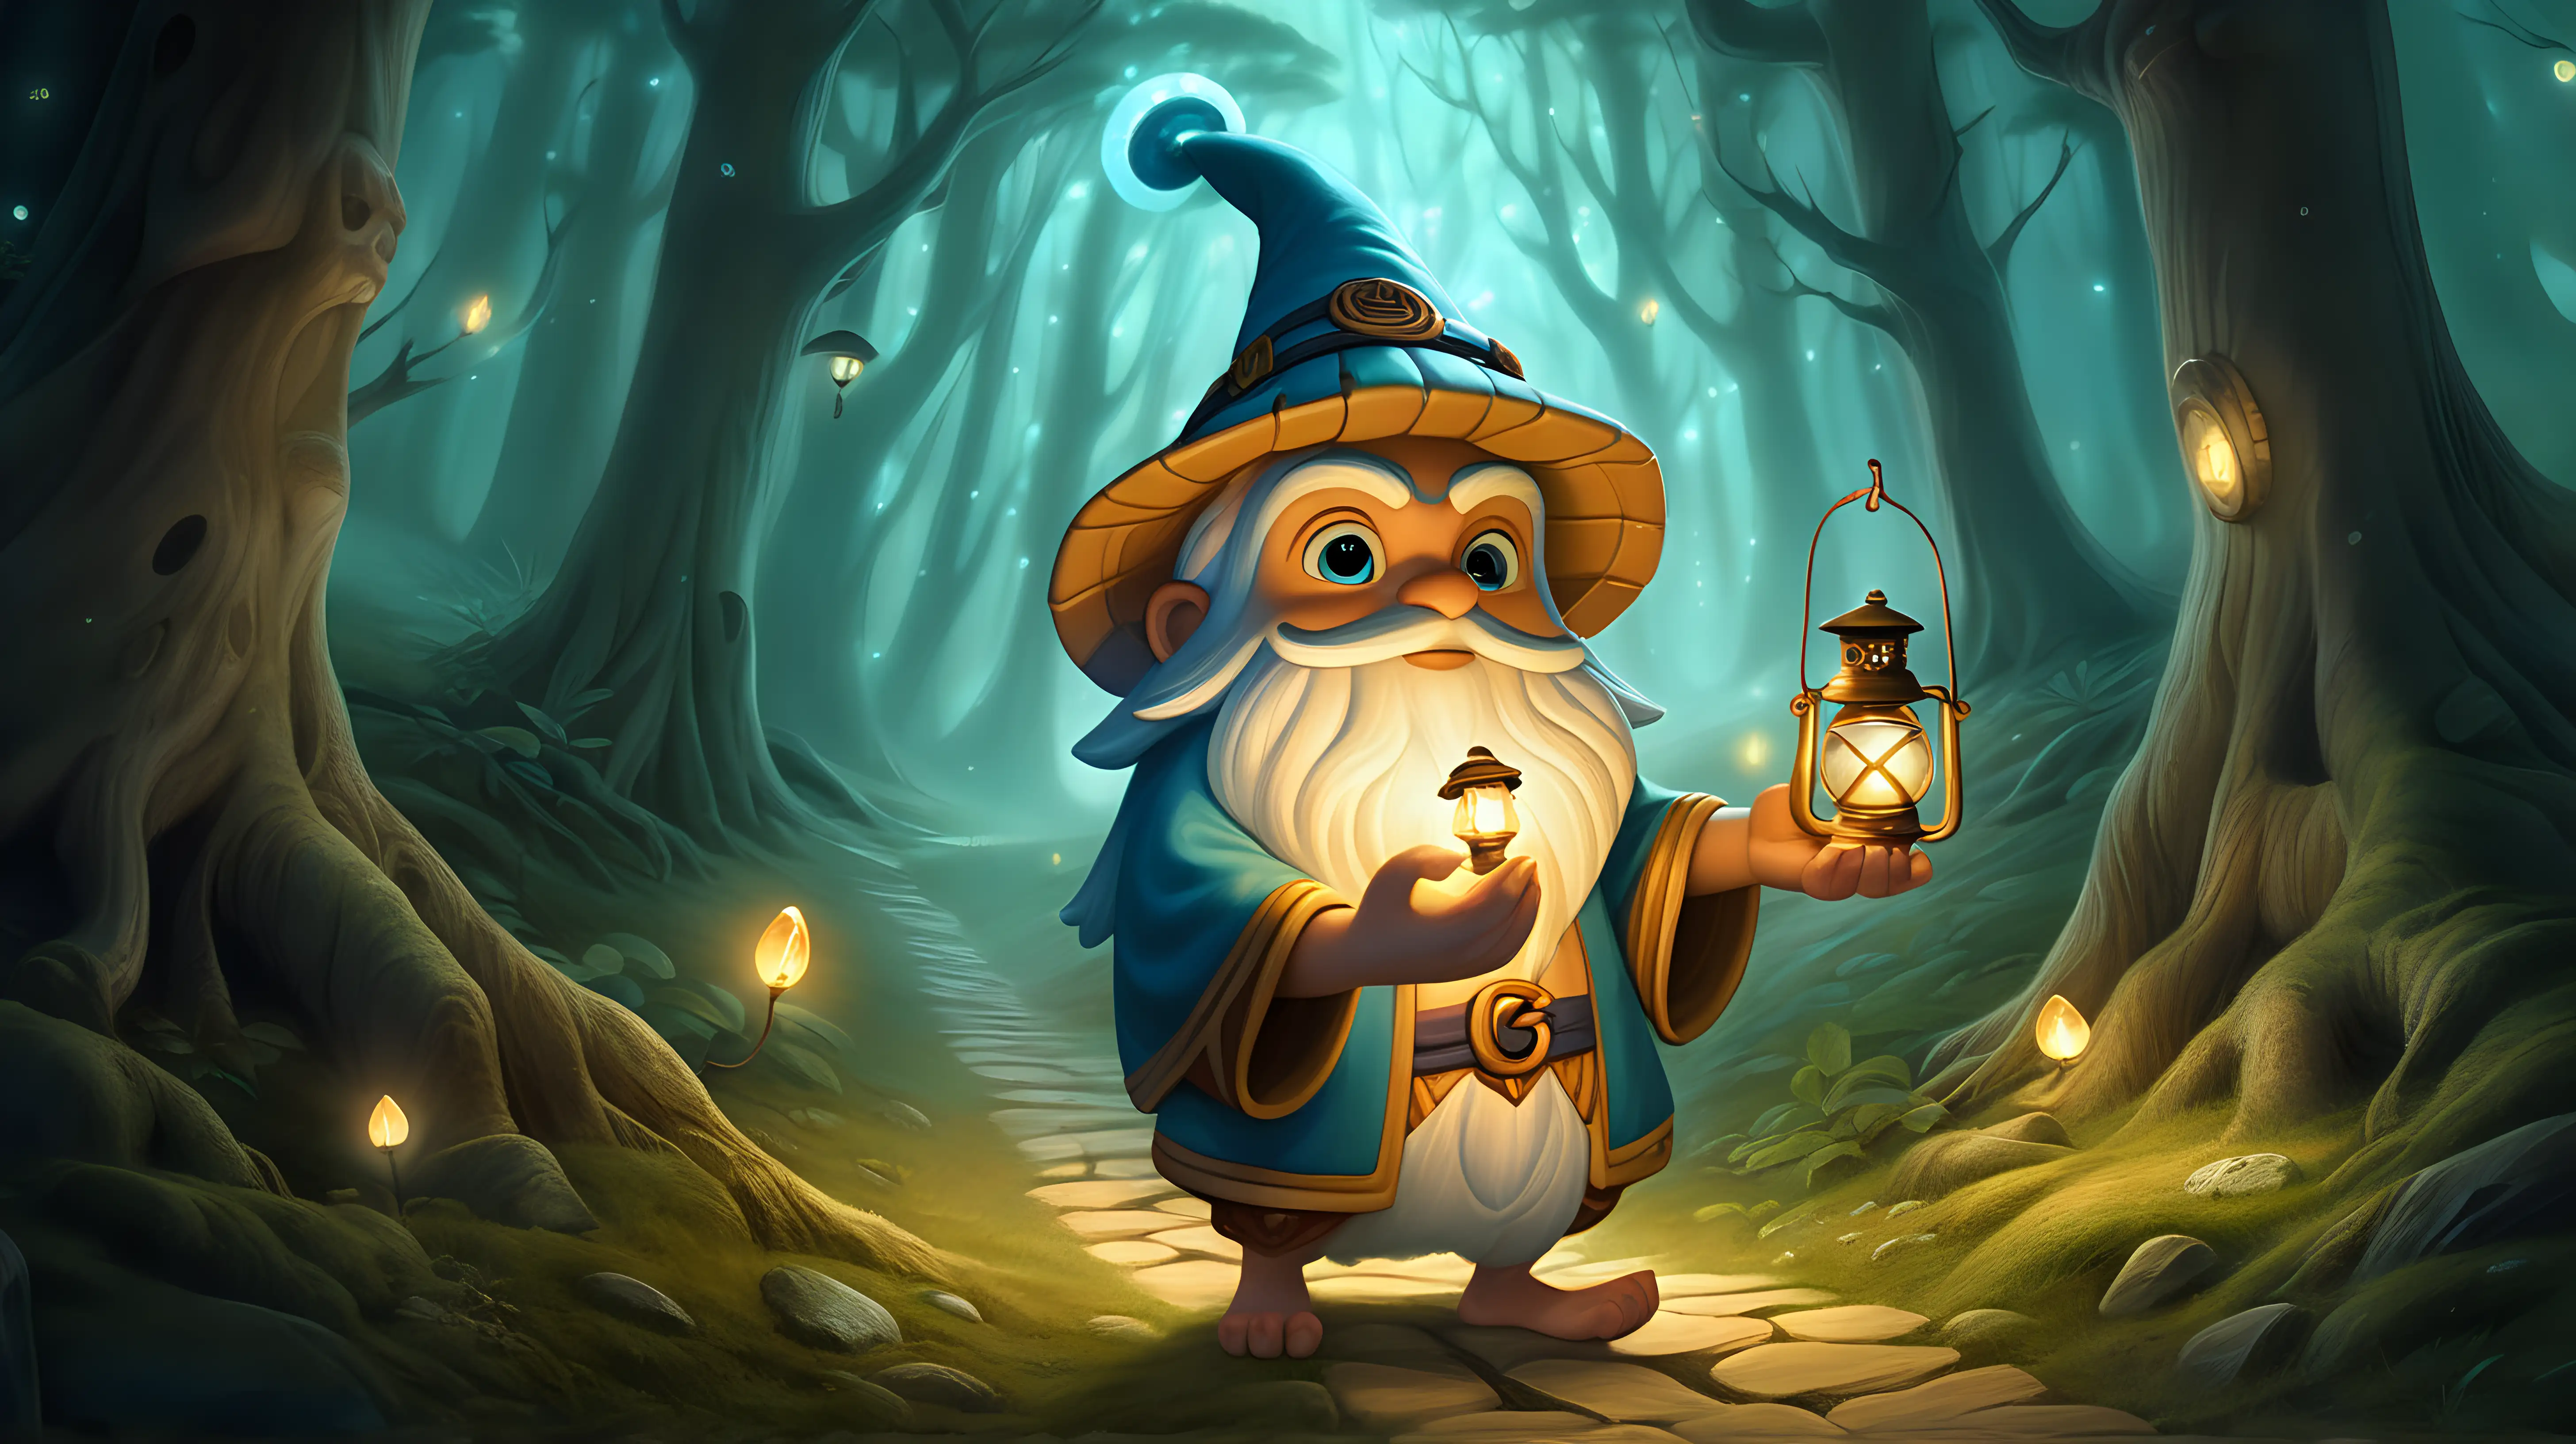 Enchanting Guide Wise Character Illuminating Mystical Forest Path